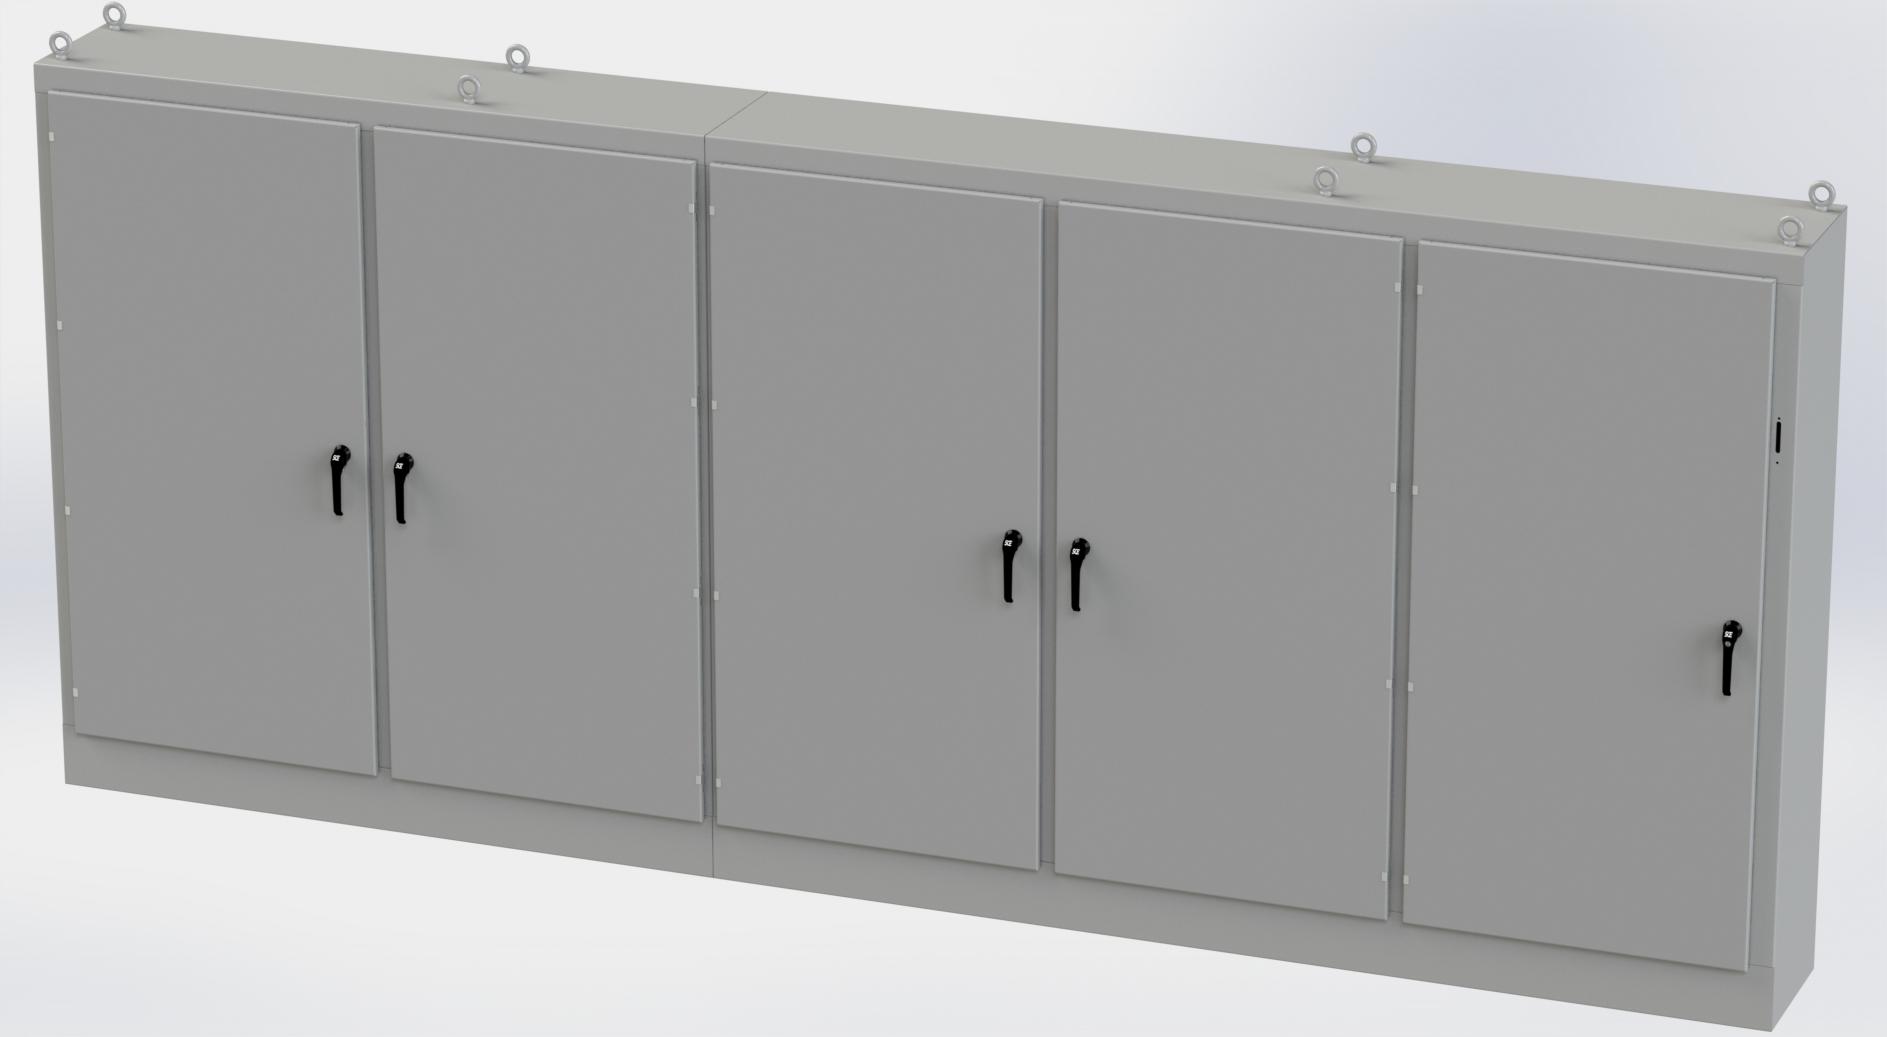 Saginaw Control SCE-84XM5EW18 5DR XM Enclosure, Height:84.00", Width:196.75", Depth:18.00", ANSI-61 gray powder coating inside and out. Sub-panels are powder coated white.